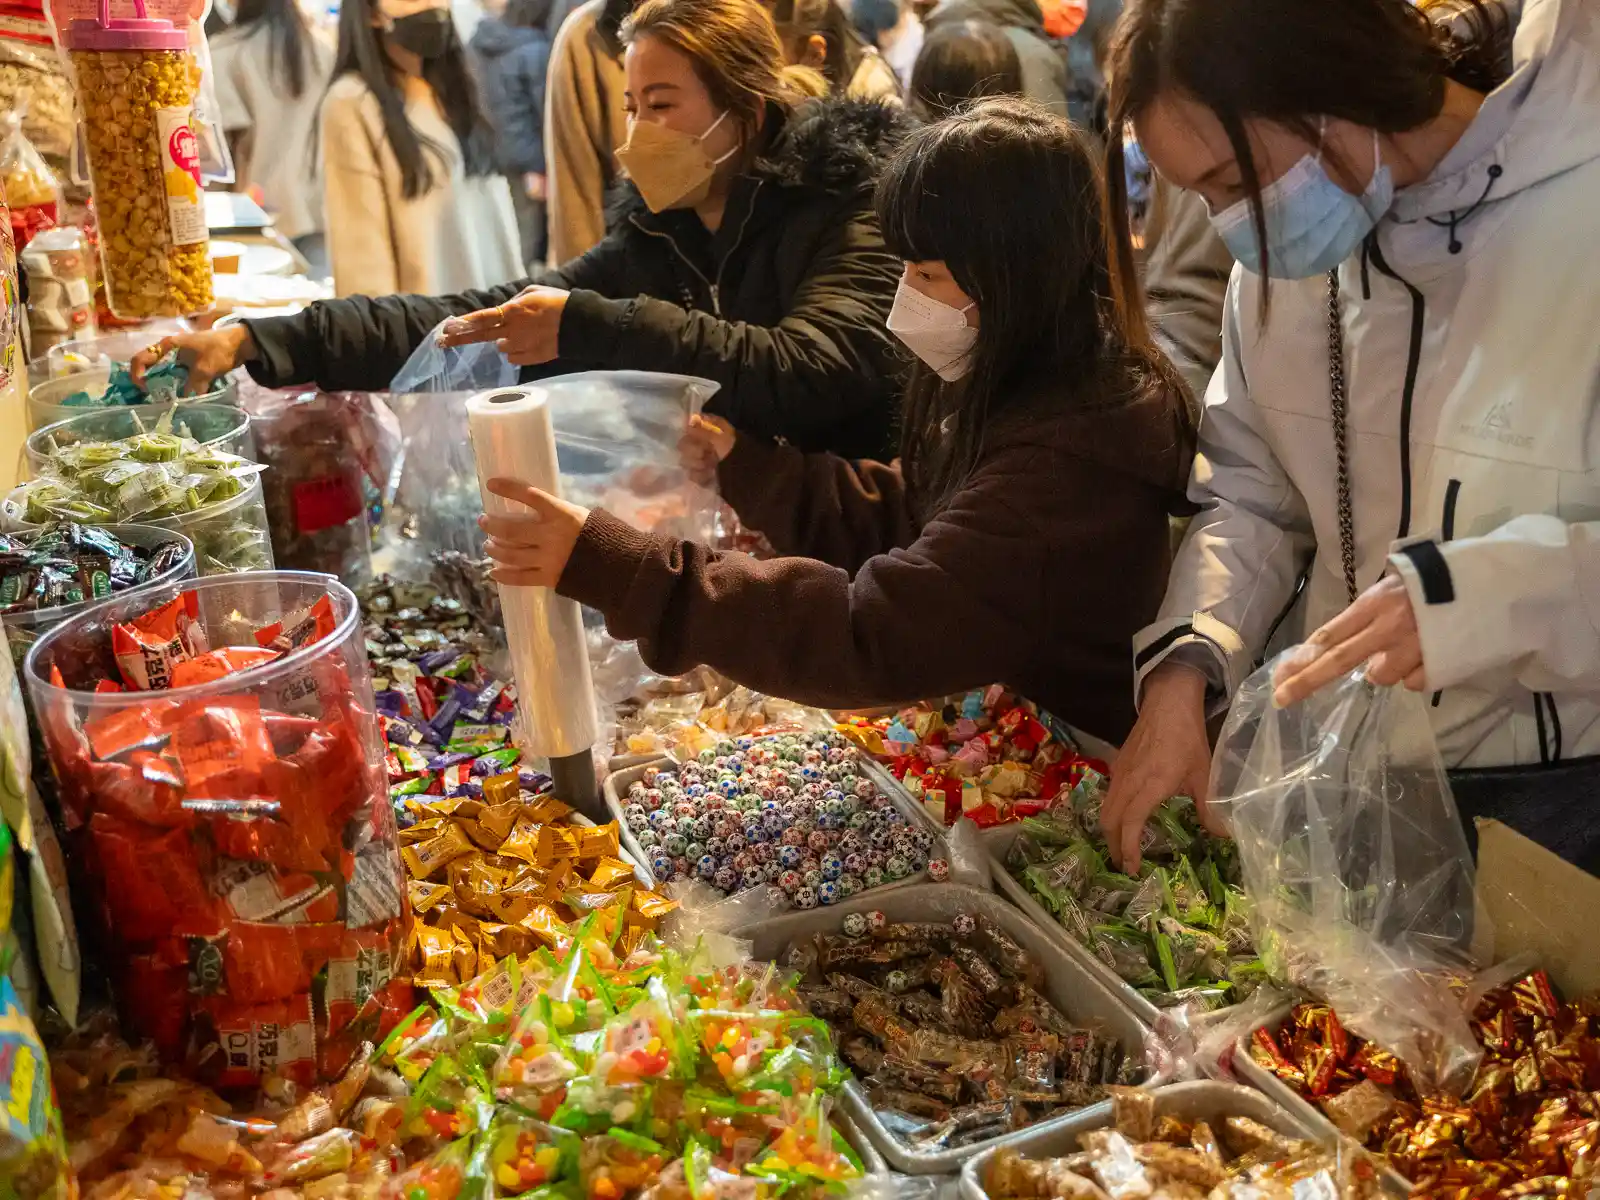 Candy is sold wholesale at New Year's markets around Taiwan.